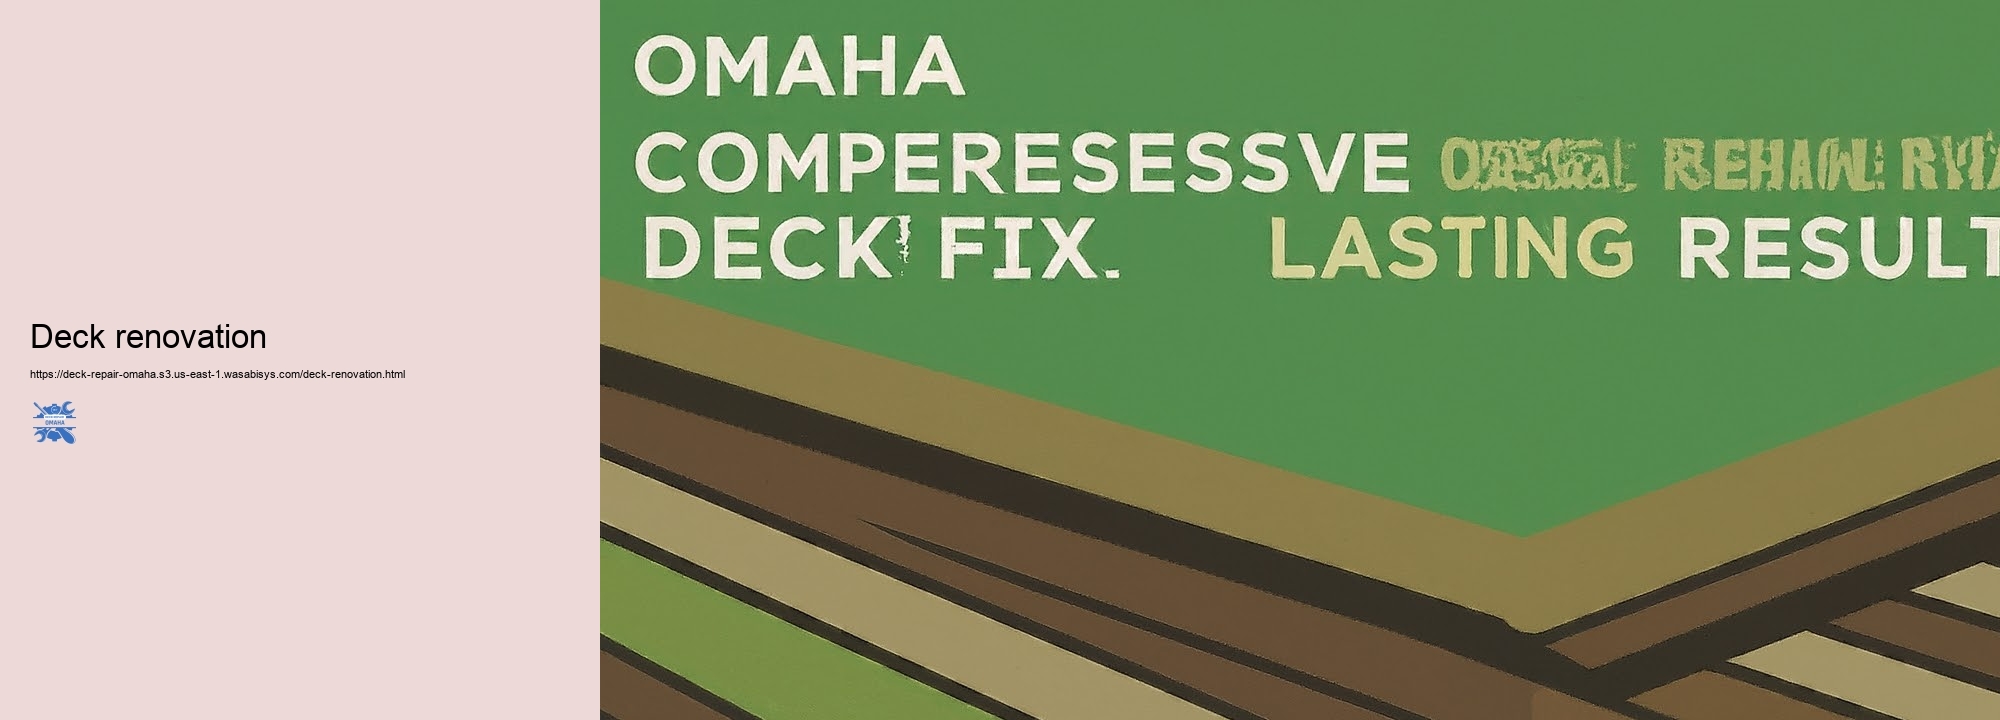 Inexpensive Deck Repair Work Solutions for Omaha Residents